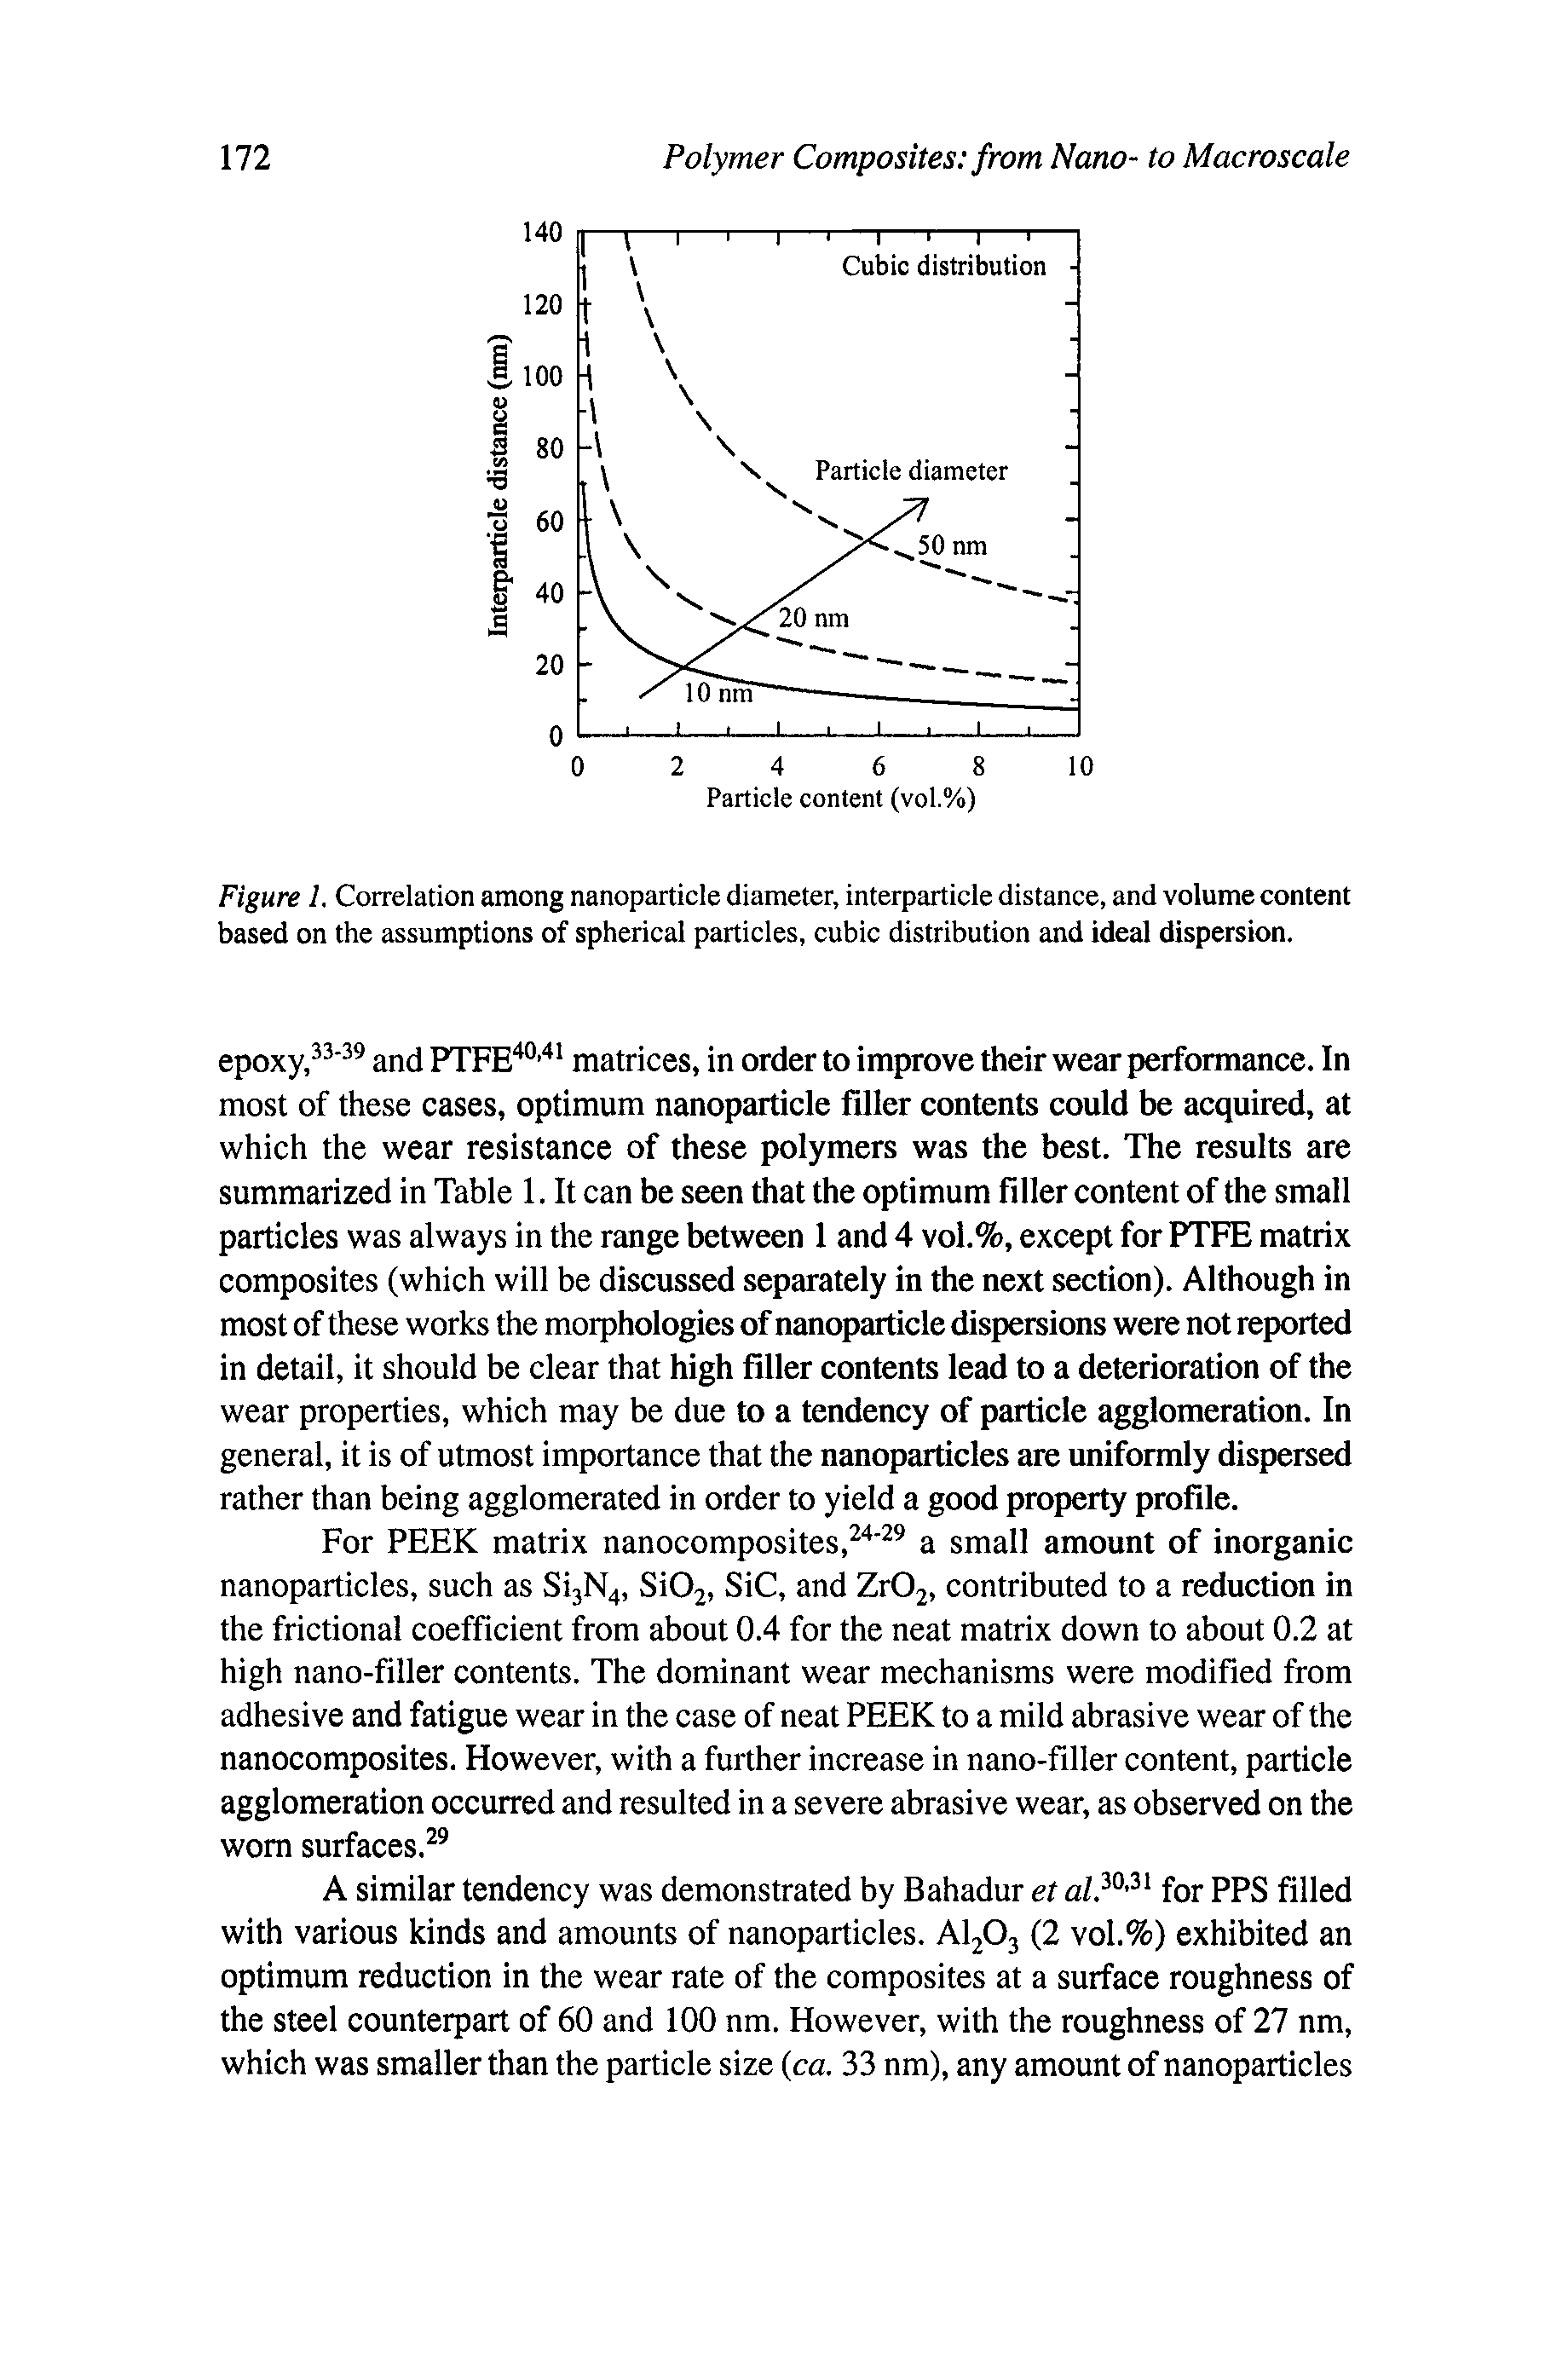 Figure 1. Correlation among nanoparticle diameter, interparticle distance, and volume content based on the assumptions of spherical particles, cubic distribution and ideal dispersion.